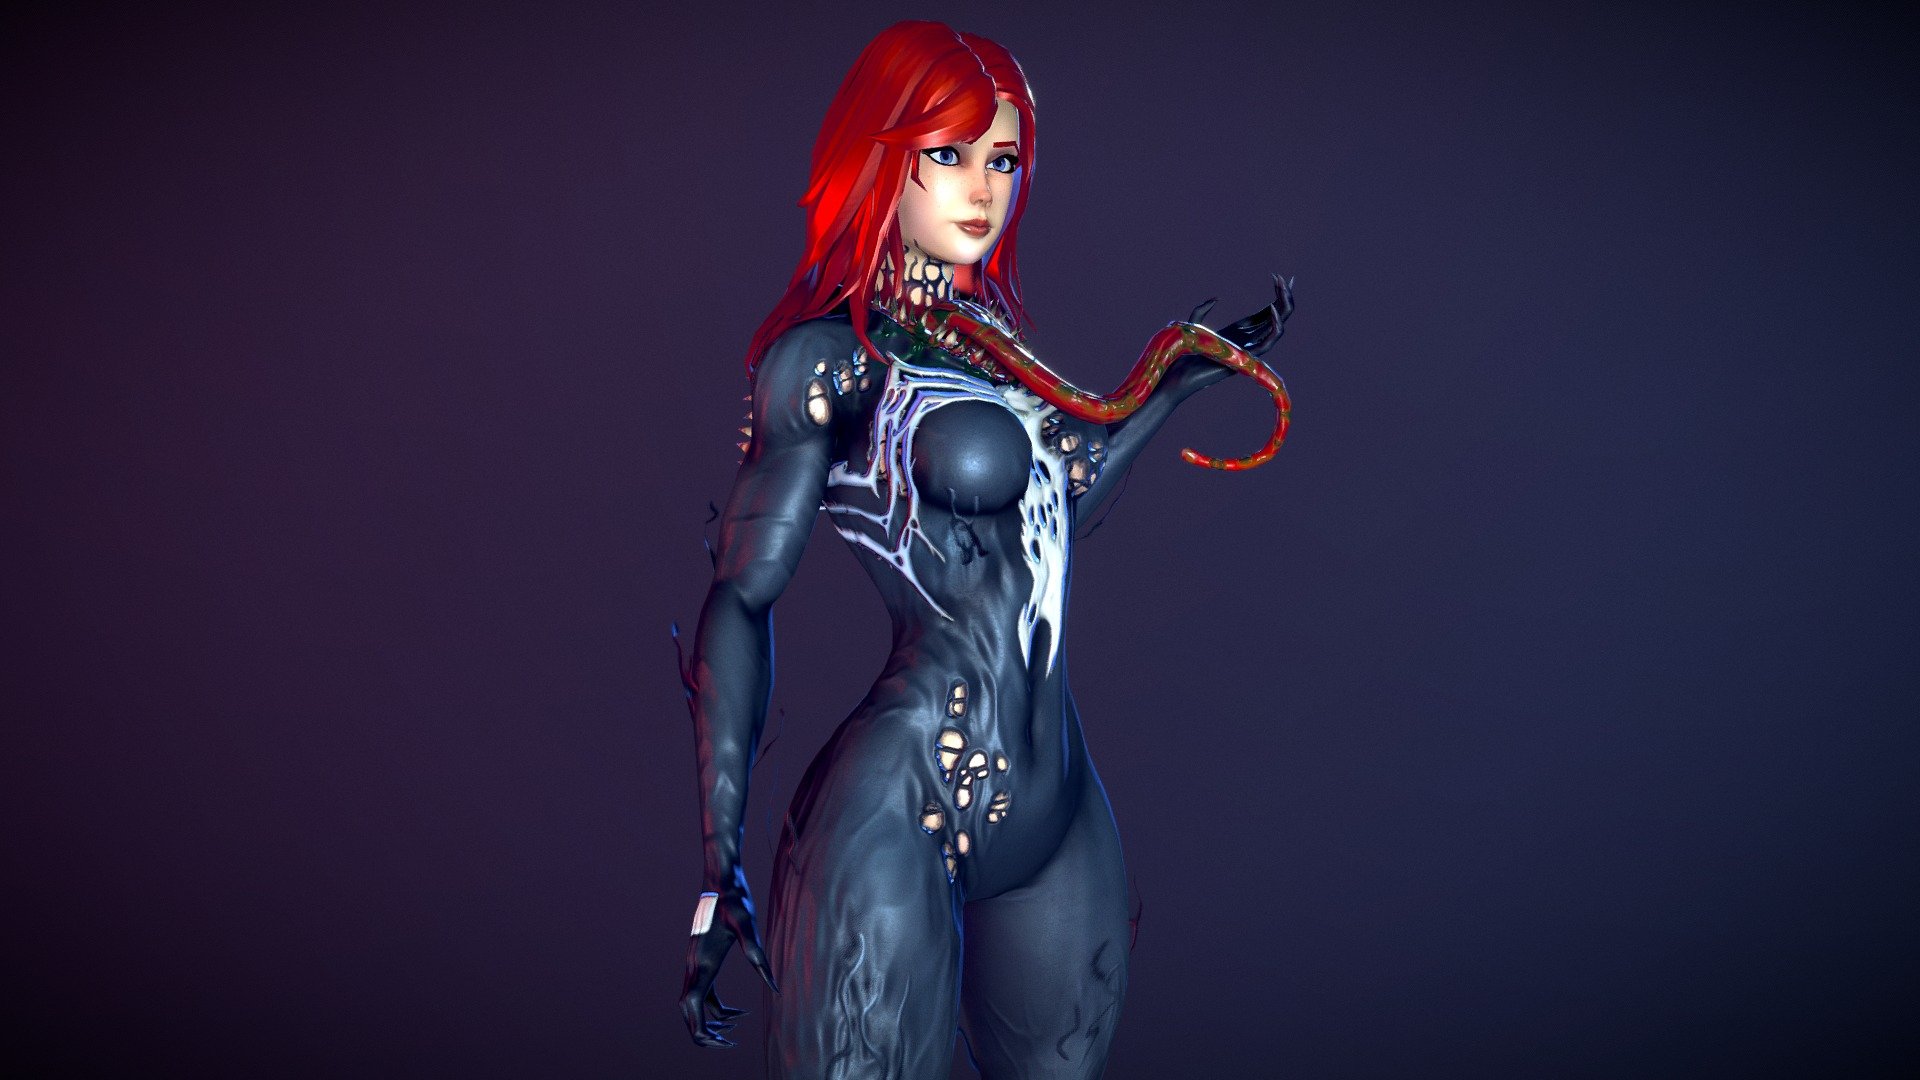 Venomized Mary Jane.

Animation and 3D-model made in Blender, texturing in Substance Painter - Mary Venom - 3D model by RegnadBIT 3d model